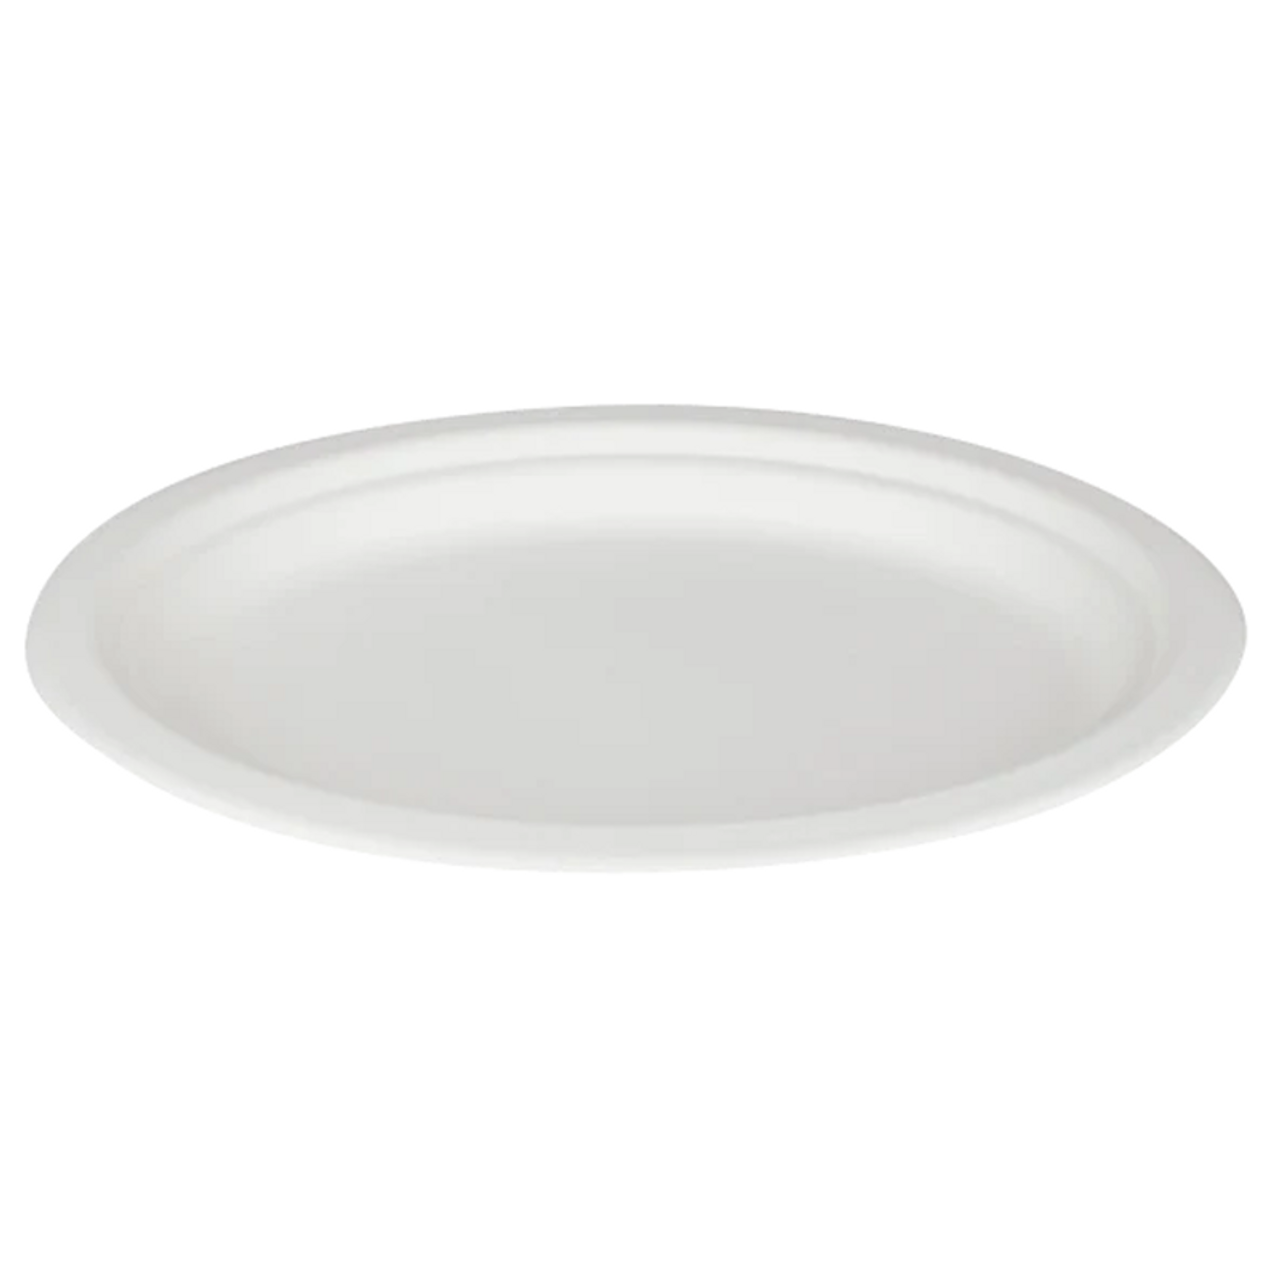 Sample 10"x8"  Biodegradable Oval Paper Plates Microwavable